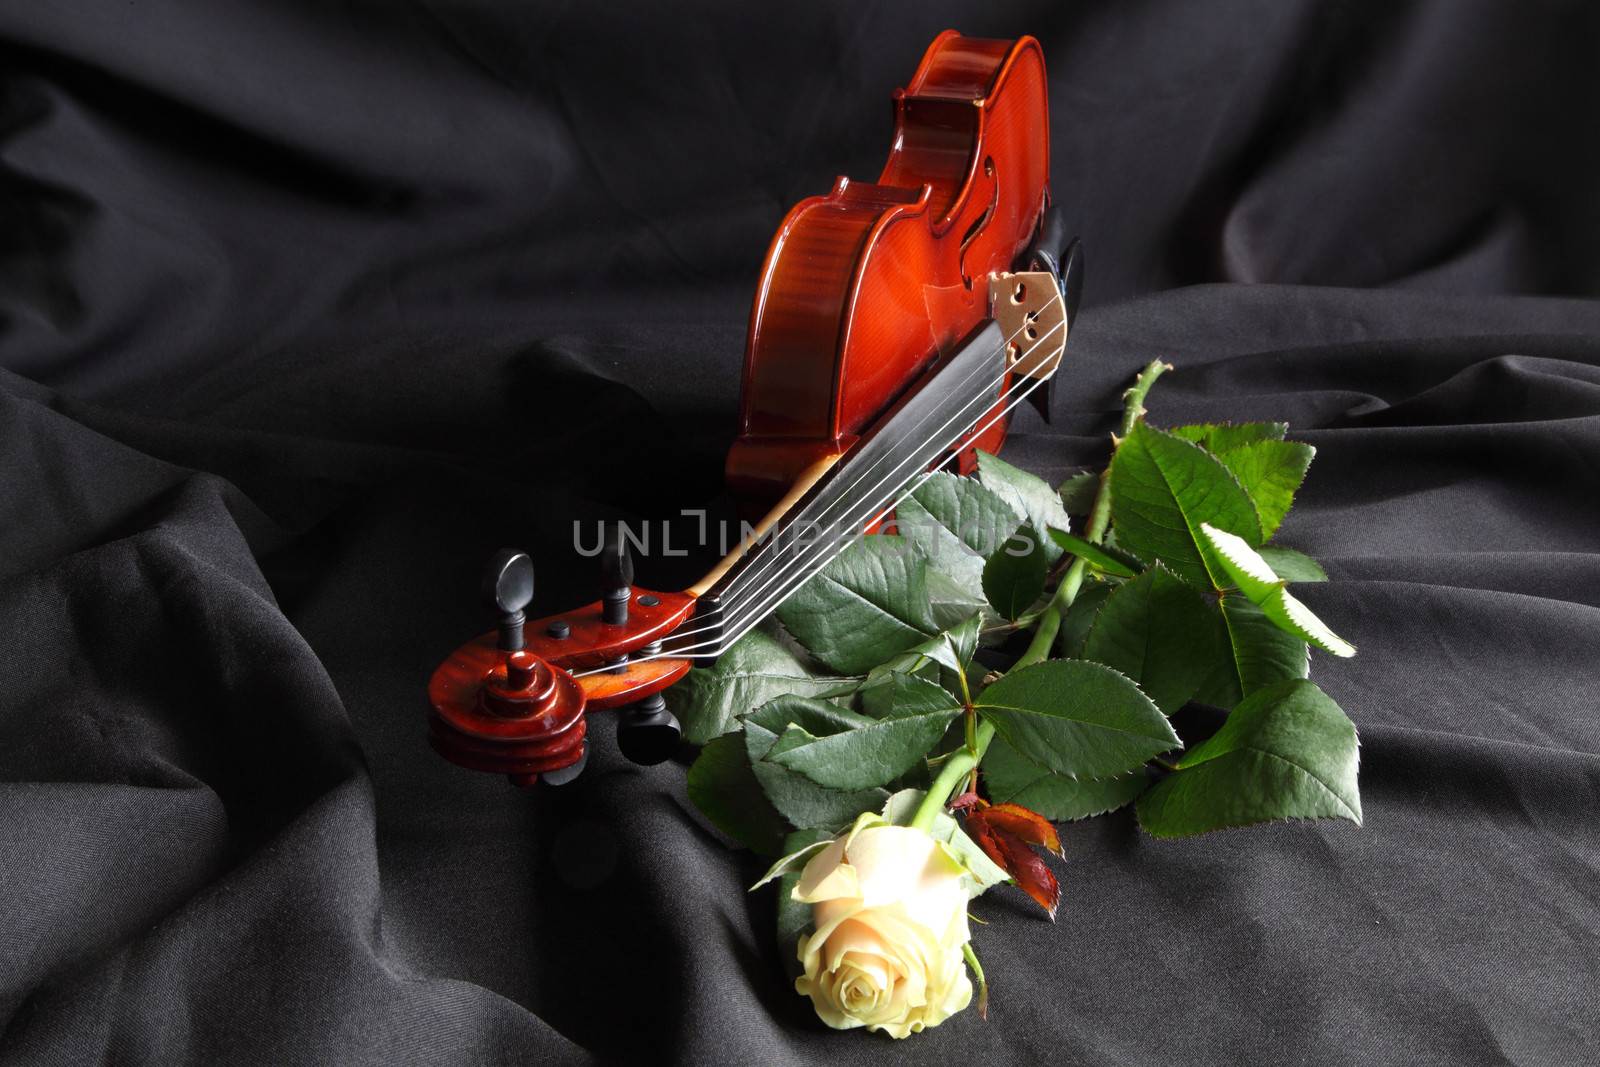 Violin with a white rose on a black background